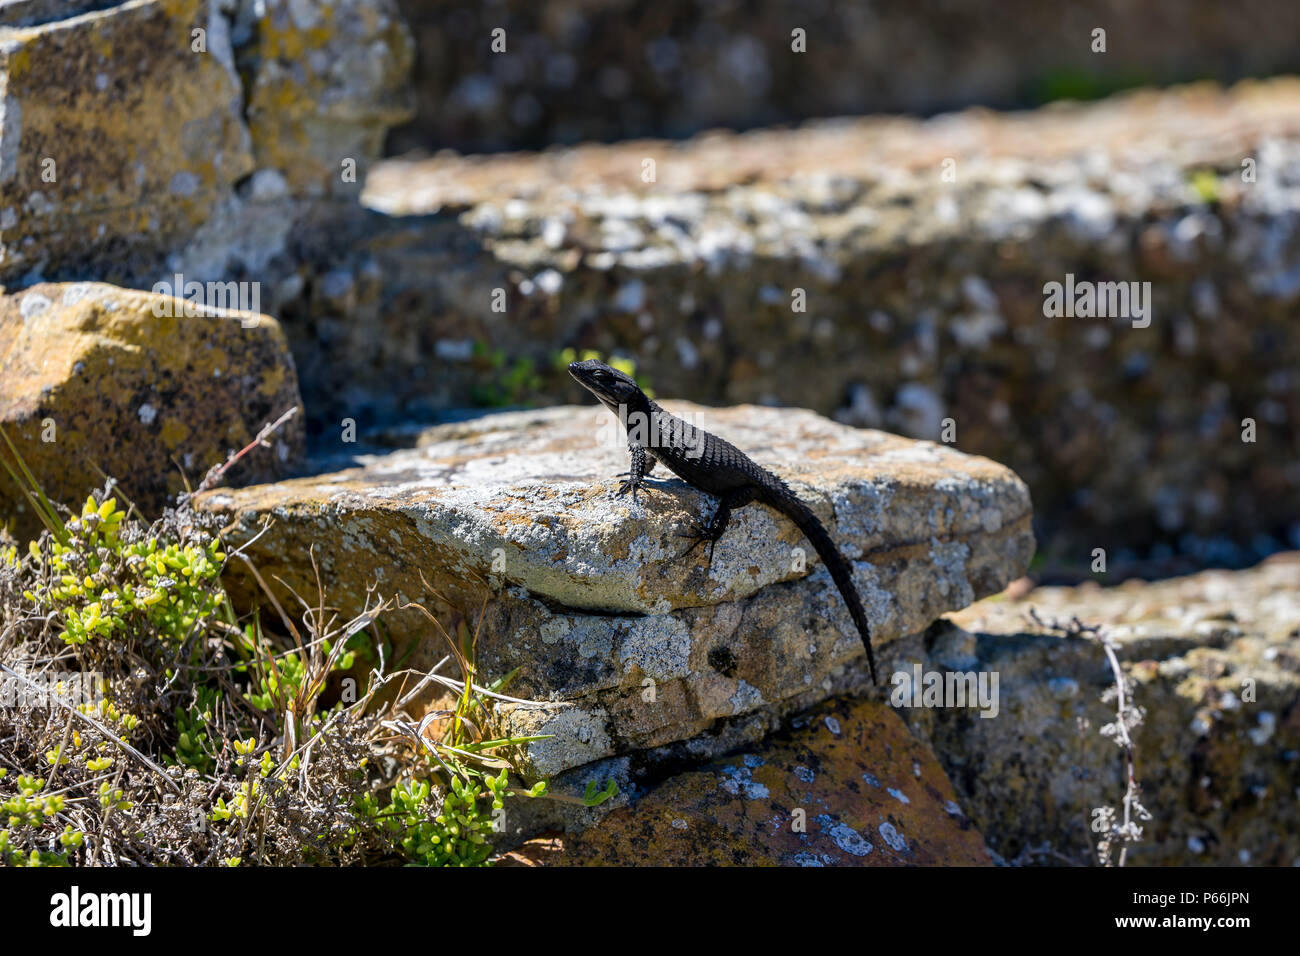 black lizzard waiting on a rock for food passing by Stock Photo